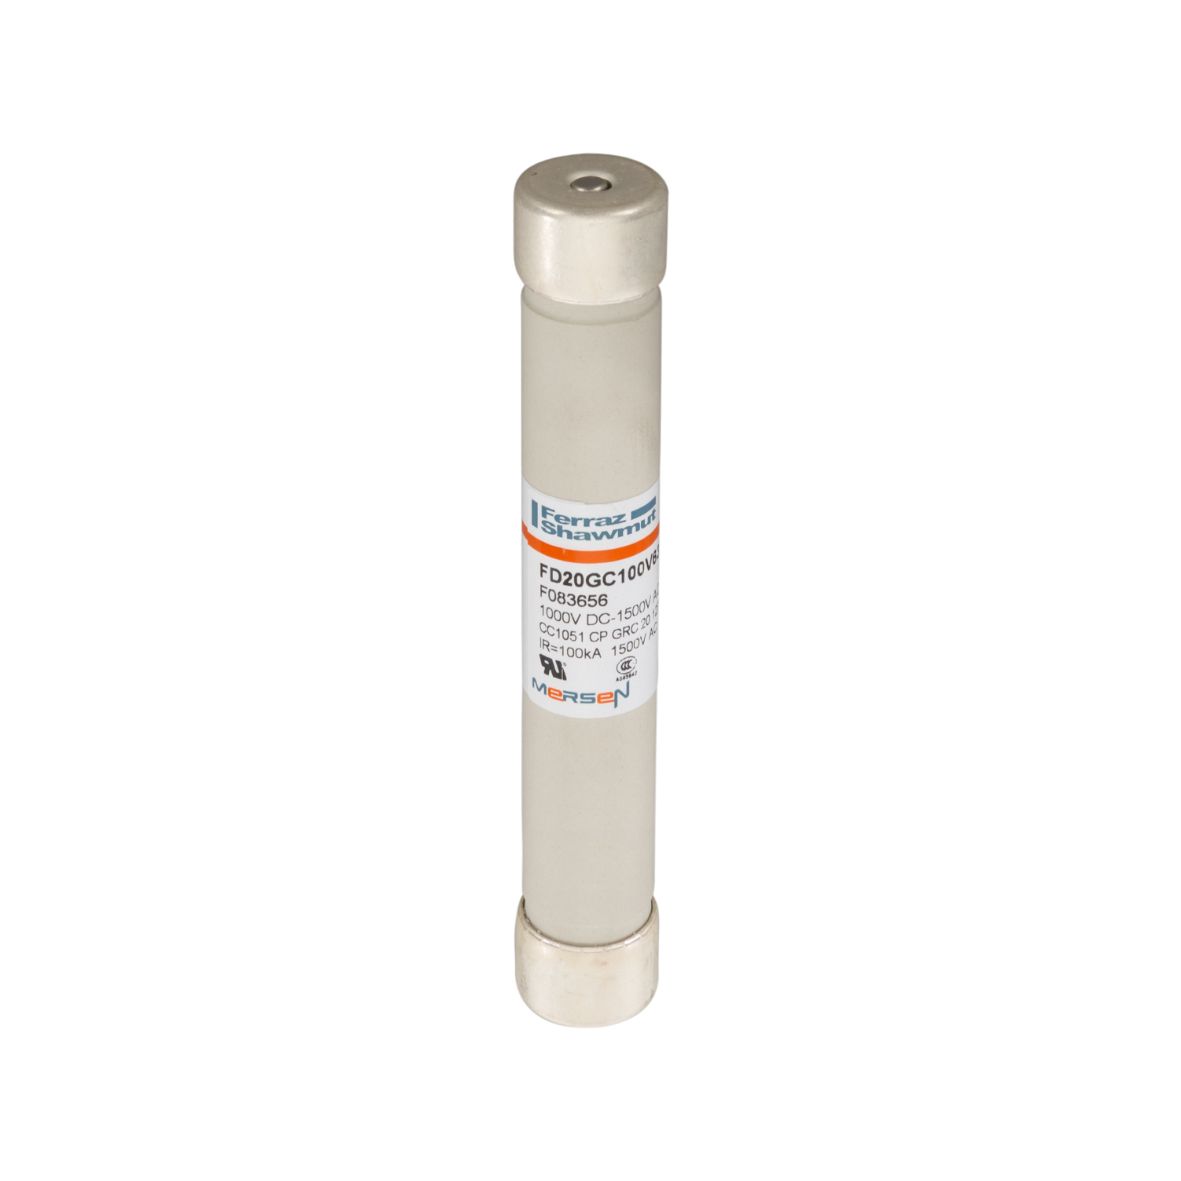 F083656 - Cylindrical fuse-link GRC 1000VDC 20x127, 63A with striker